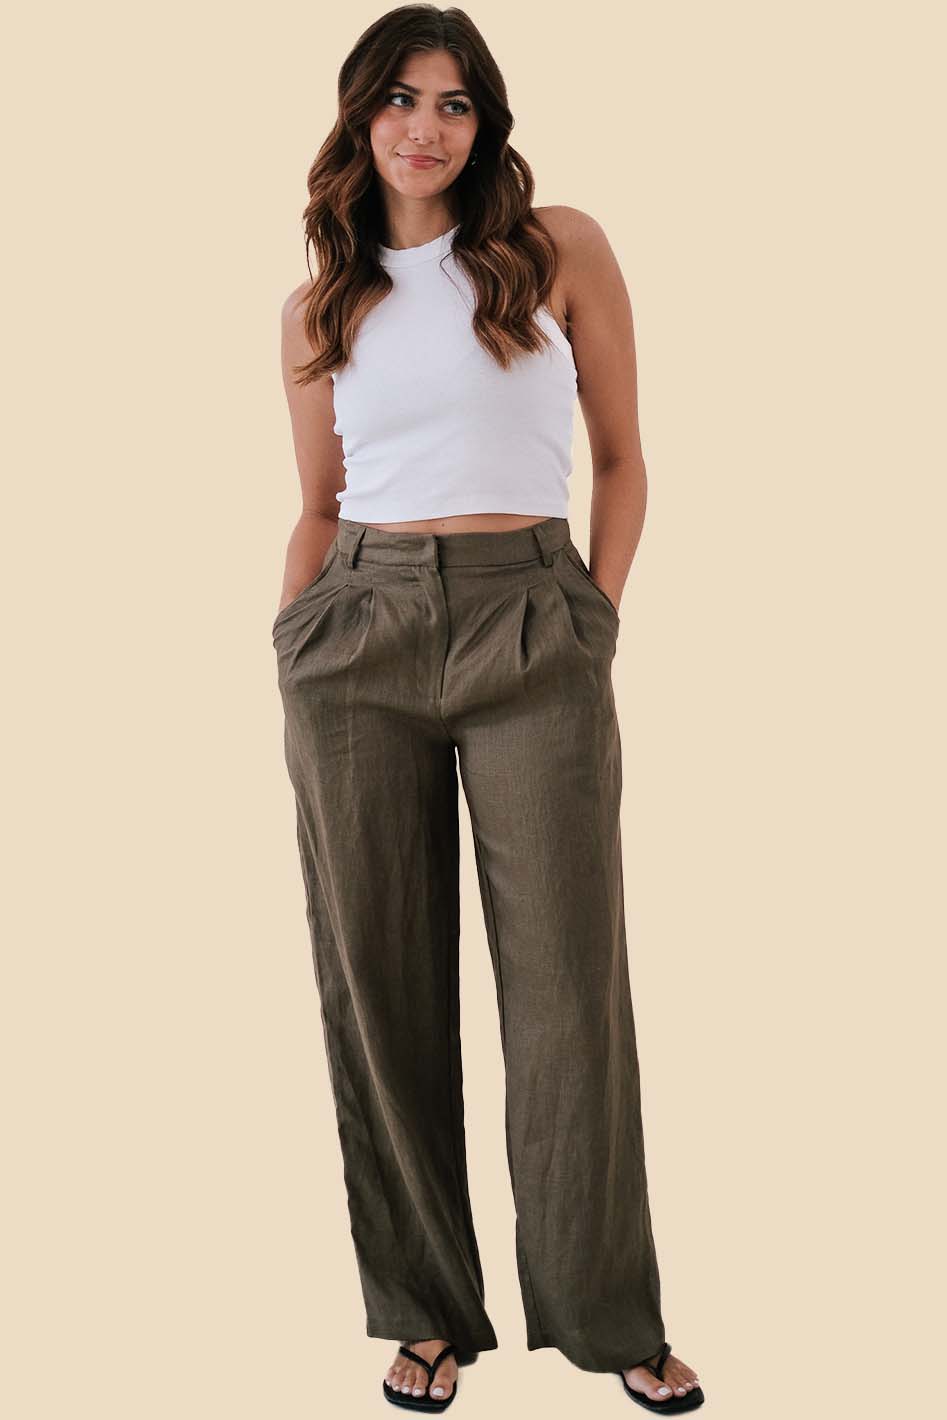 Lucy Paris Inara Olive Linen Pleated Wide Leg Pants